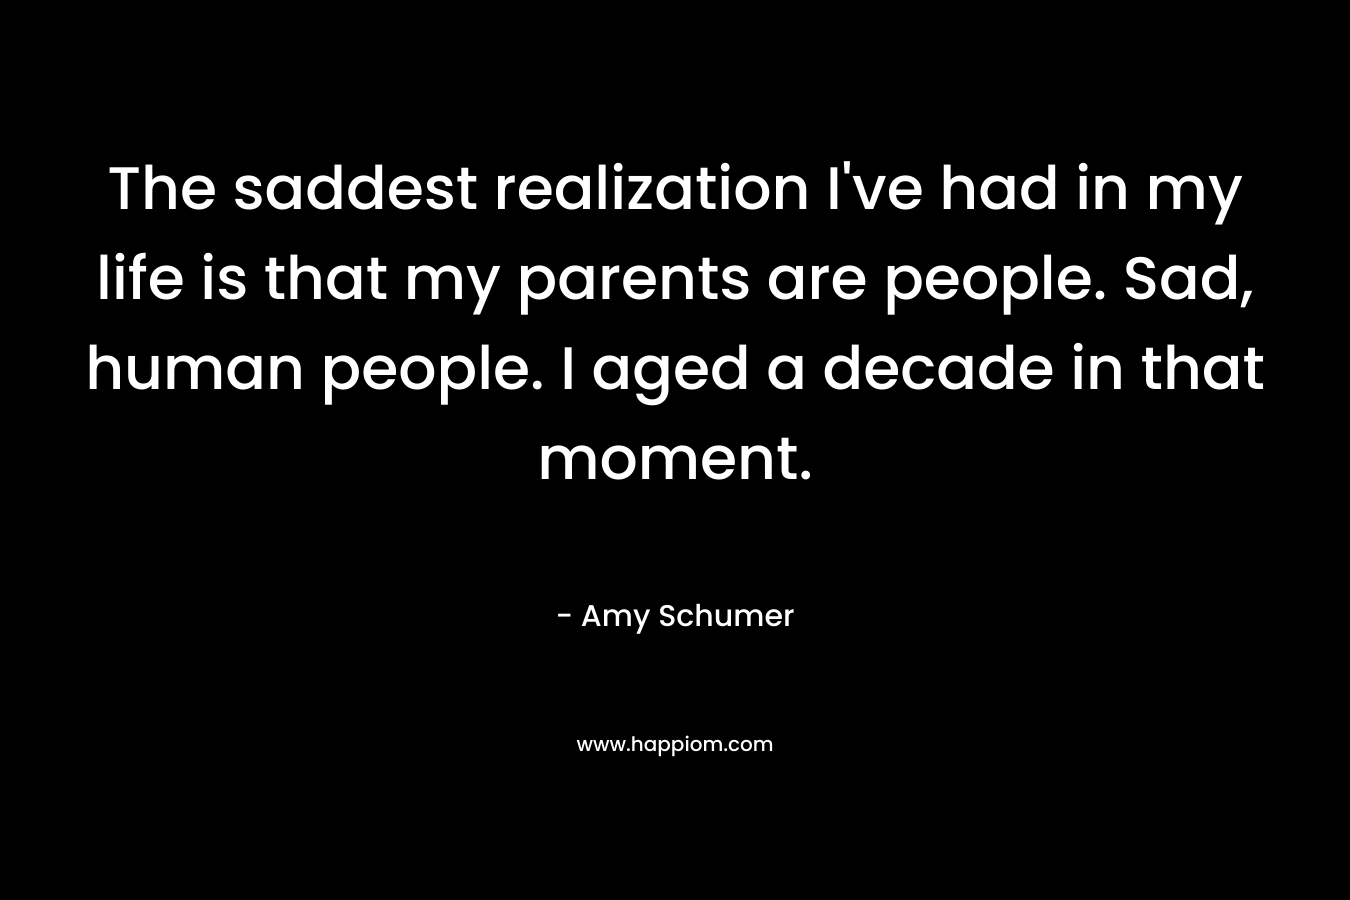 The saddest realization I’ve had in my life is that my parents are people. Sad, human people. I aged a decade in that moment. – Amy Schumer